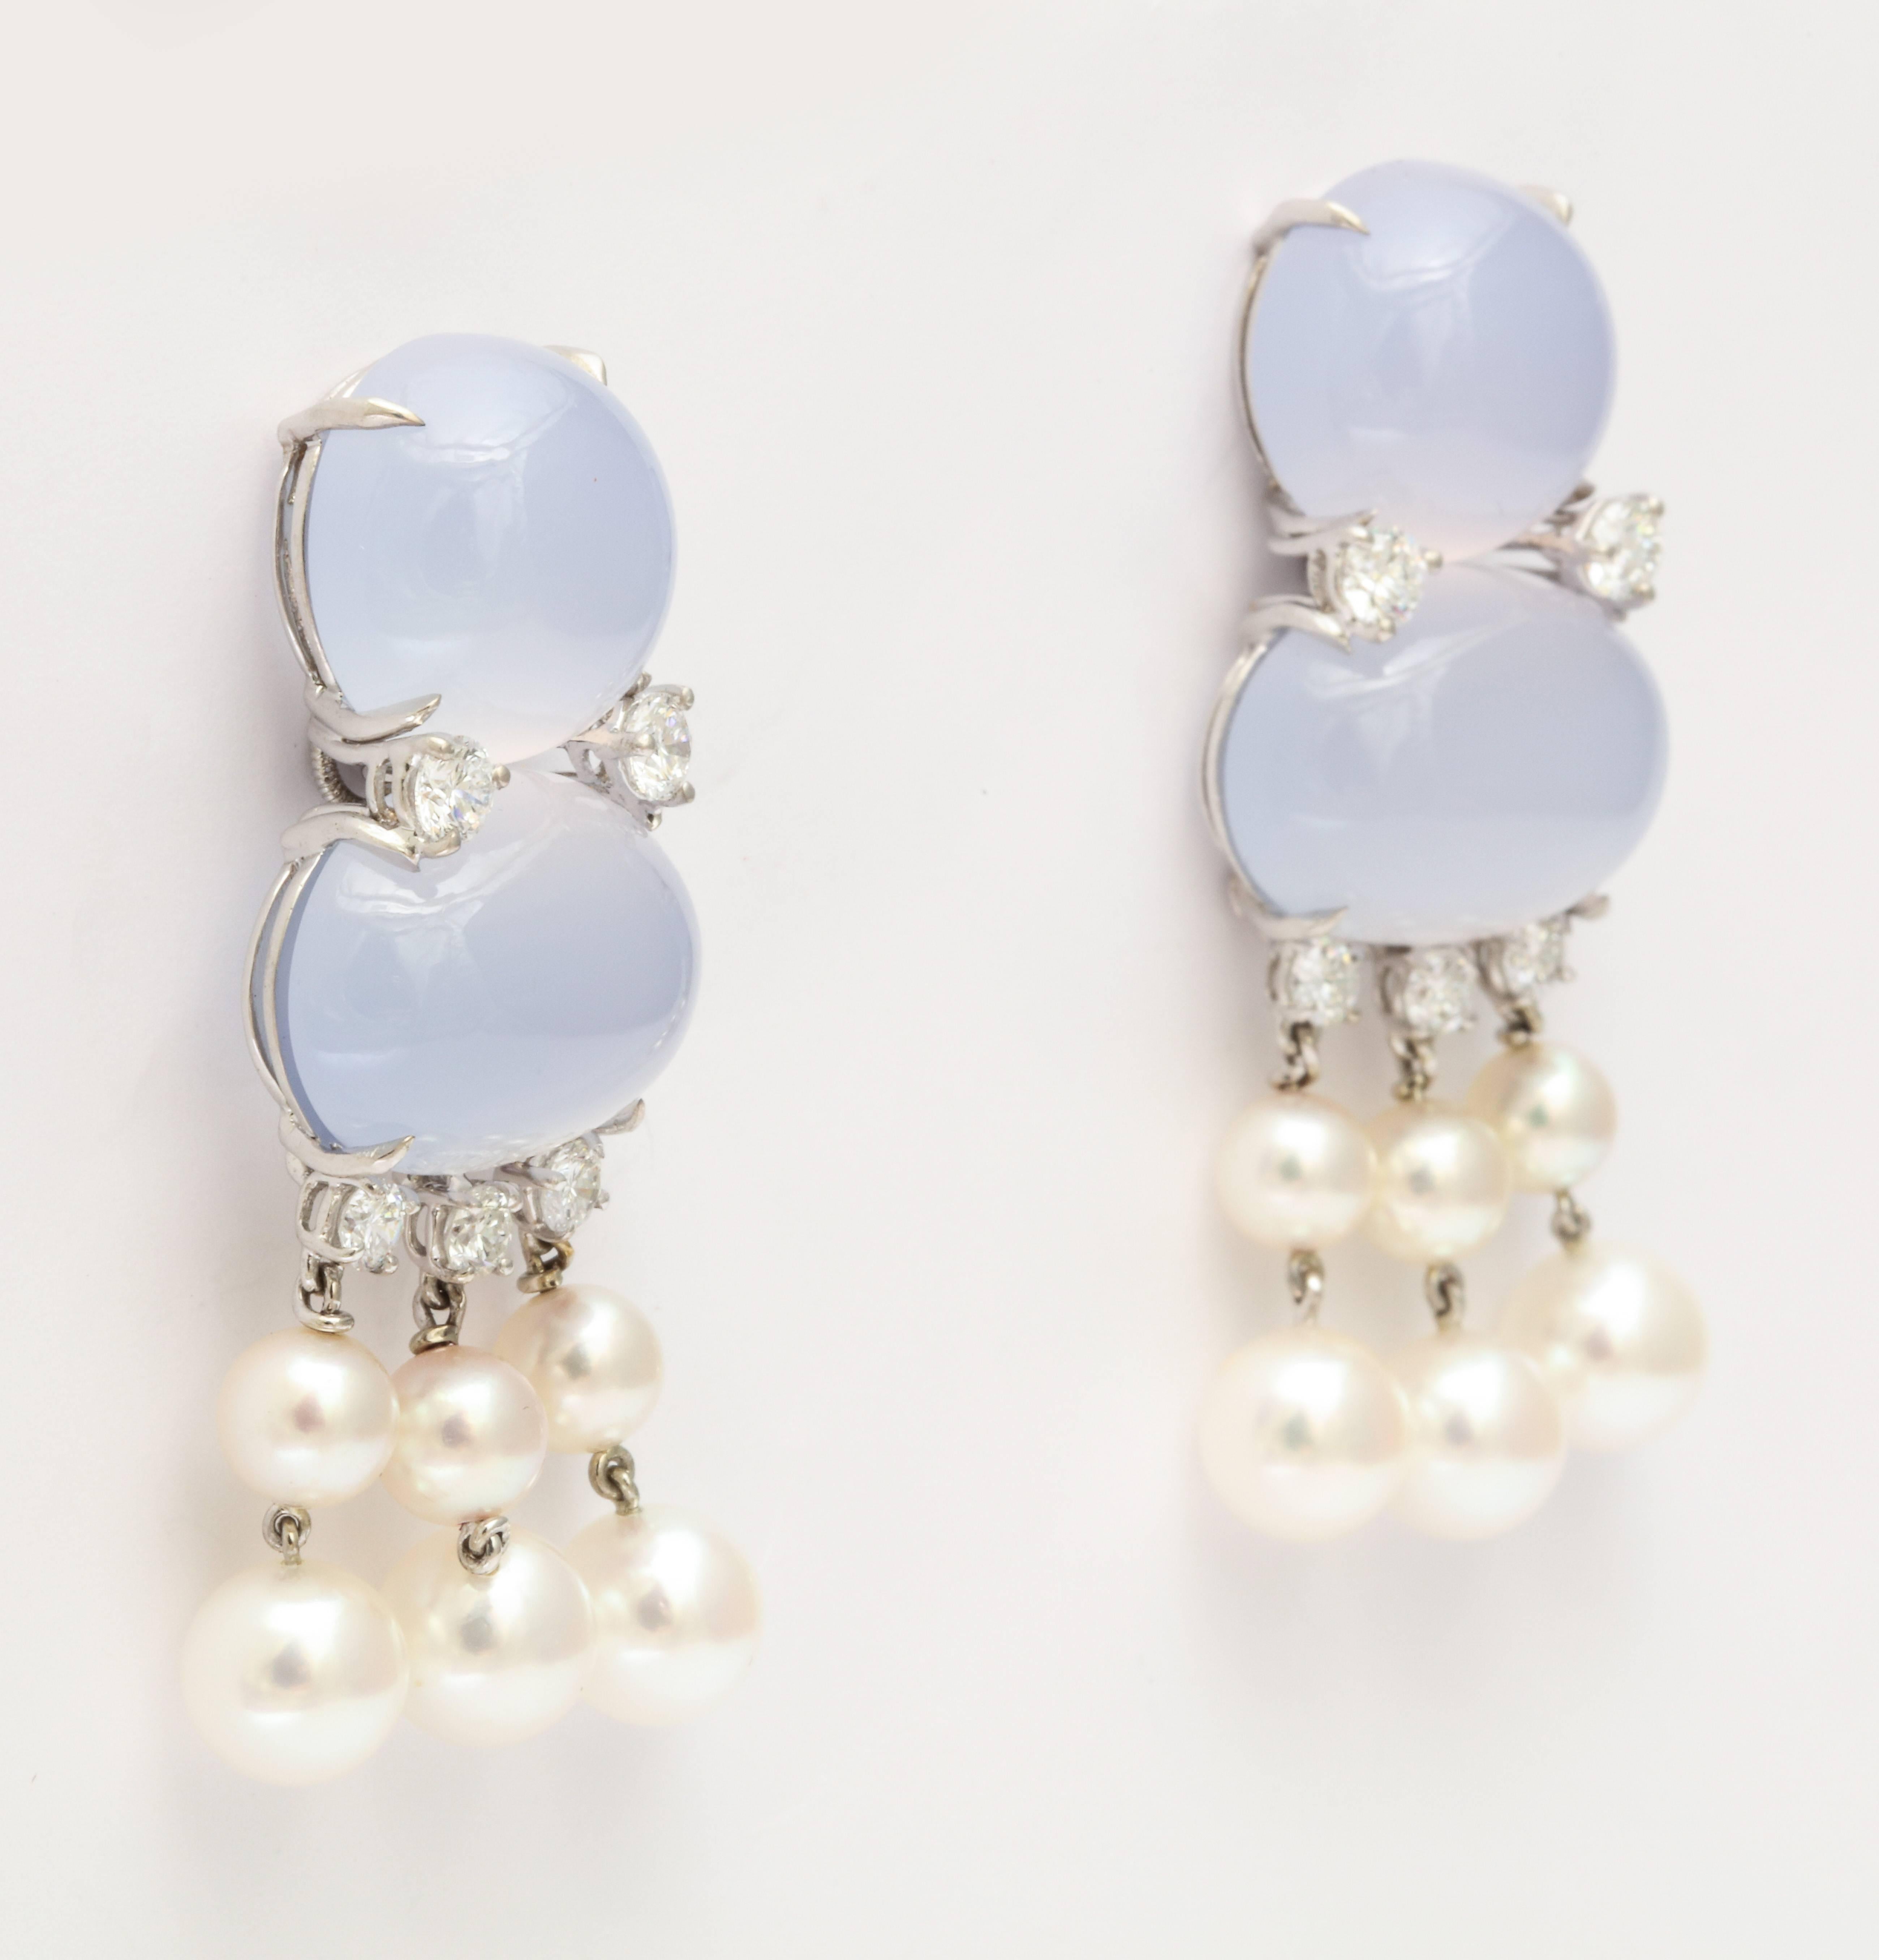 A pair of festive yet elegant dangle earrings made in 18 karat white gold featuring chalcedony, cultured pearl and white round brilliant diamonds.  Each earring has 6 cultured pearls designed as a graduated fringe. There is a total diamond weight of